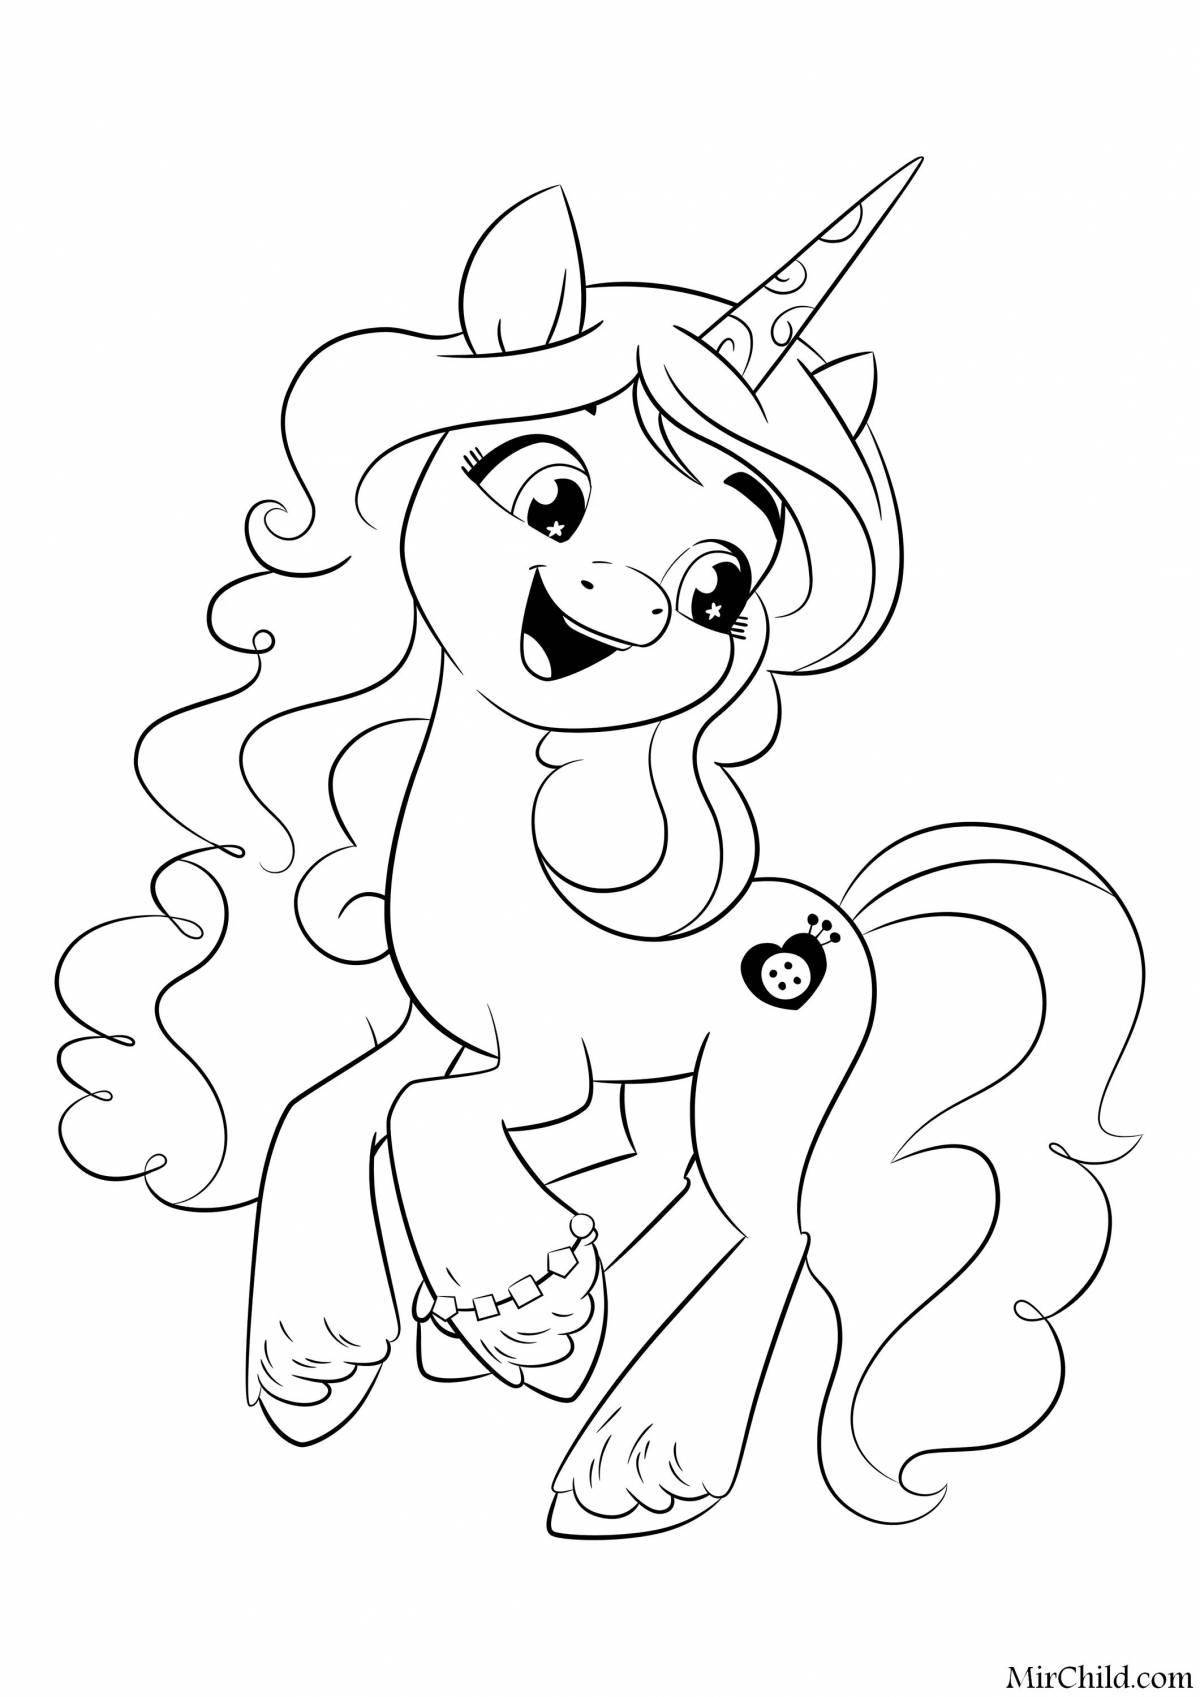 Coloring page glamor pony sleigh